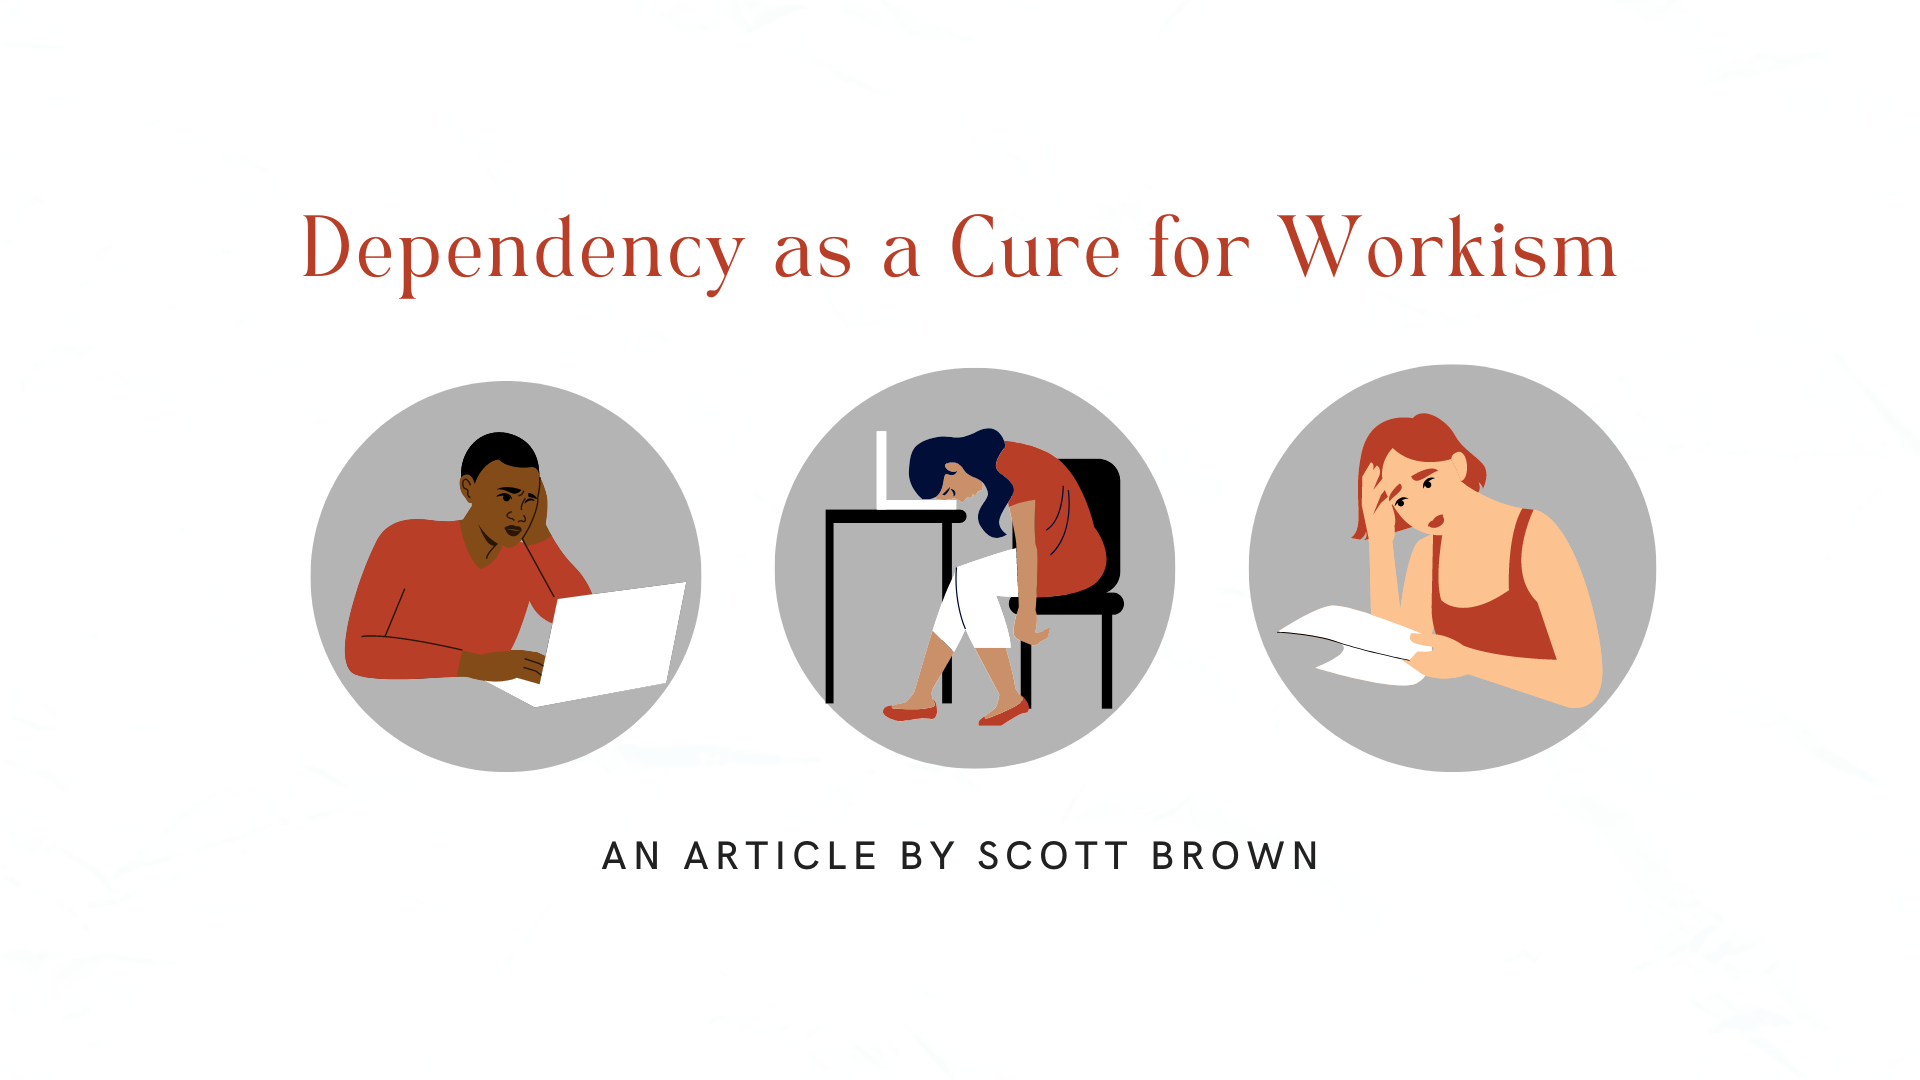 Dependency as a Cure for Workism